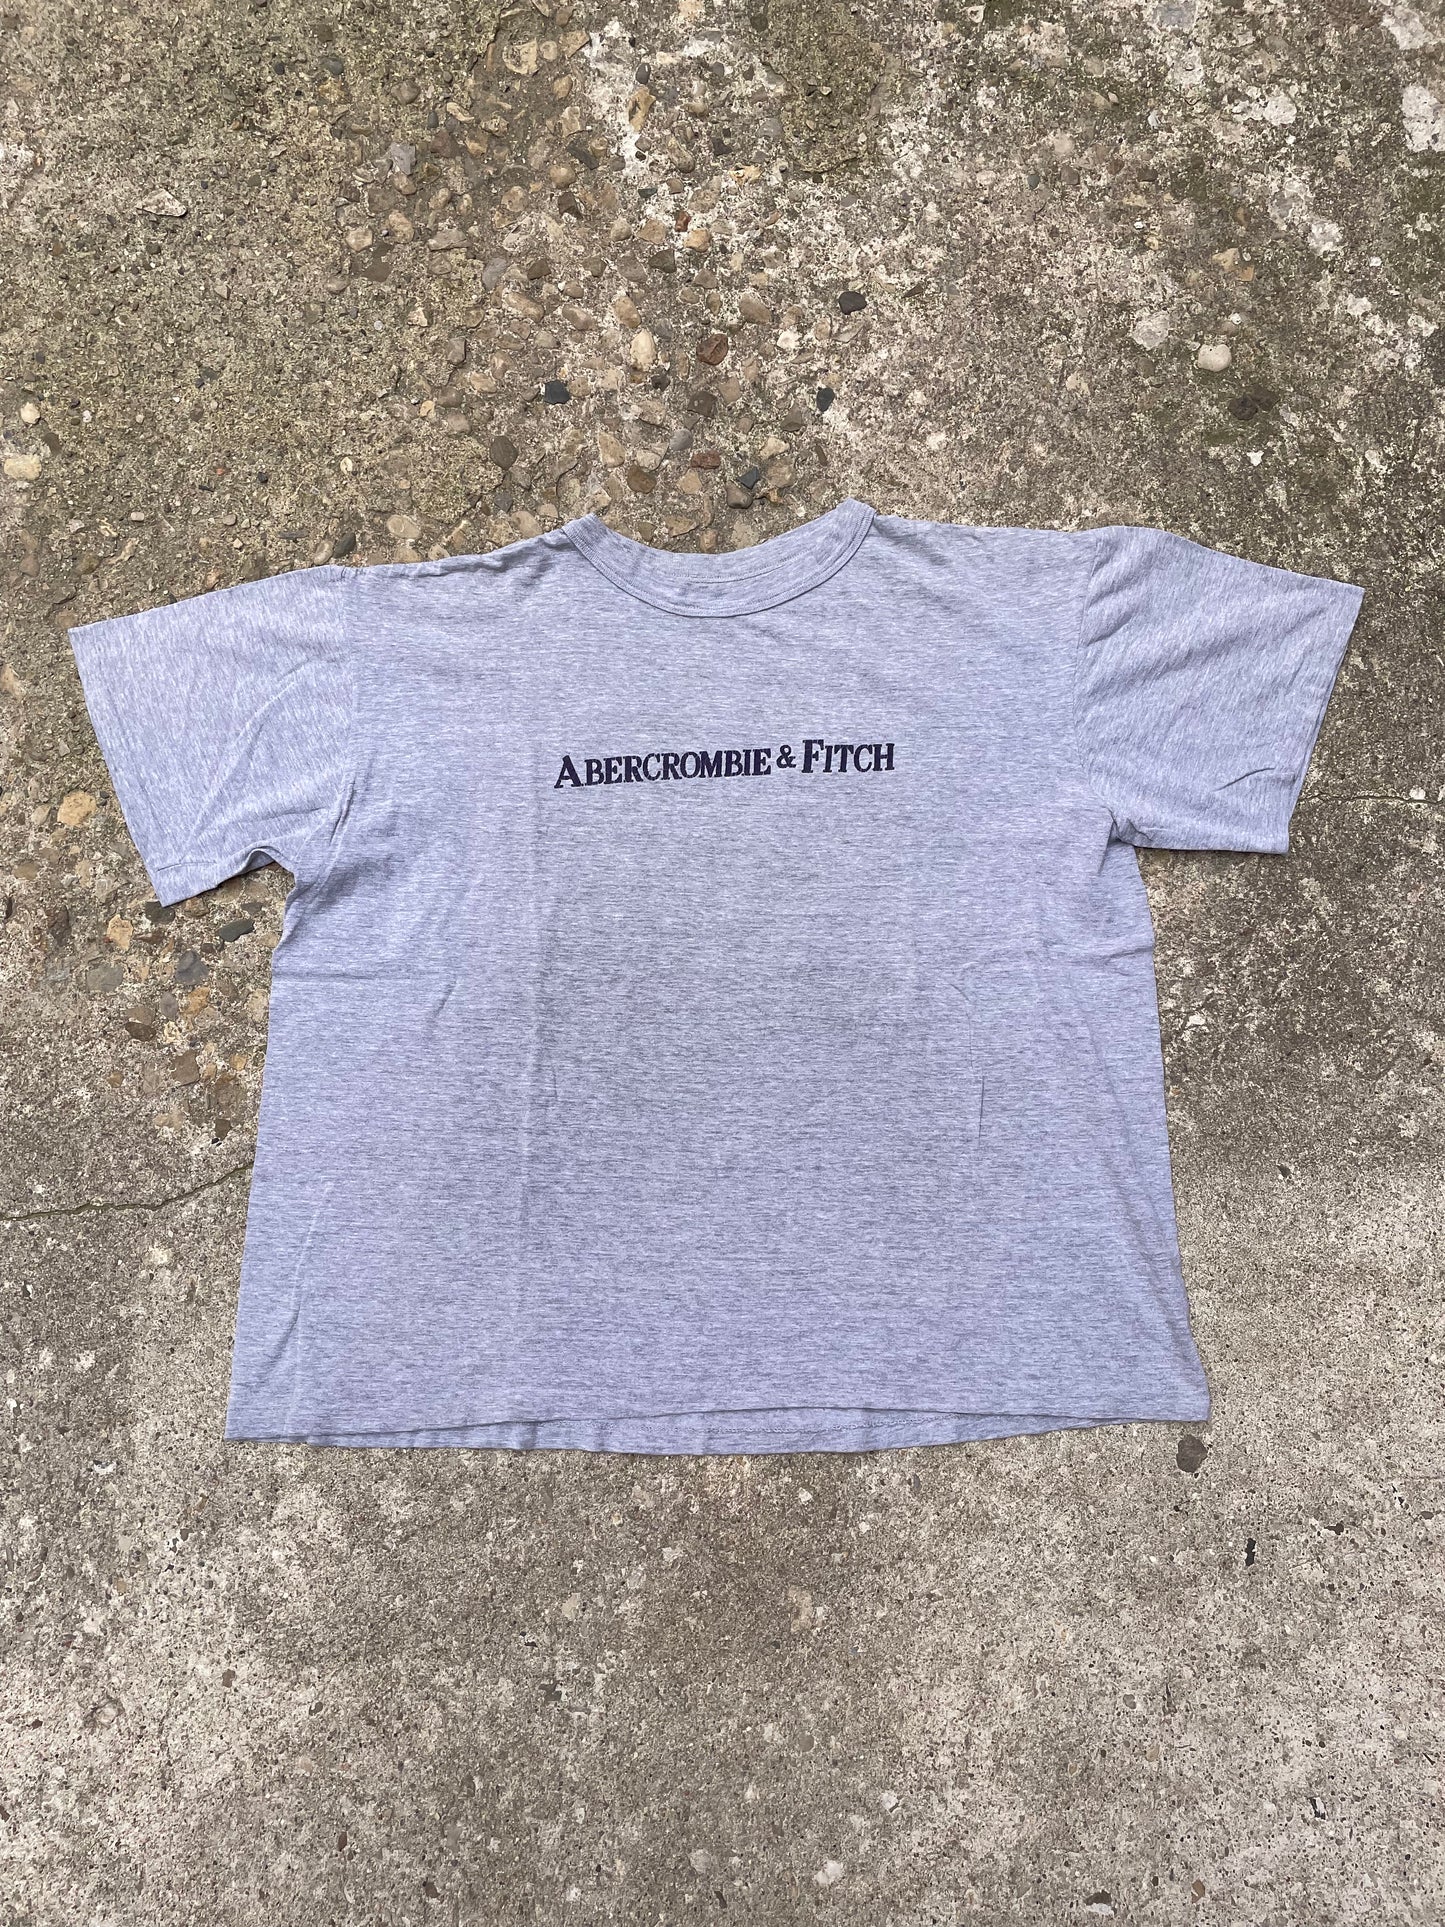 1980's/1990's Abercrombie & Fitch T-Shirt - XL